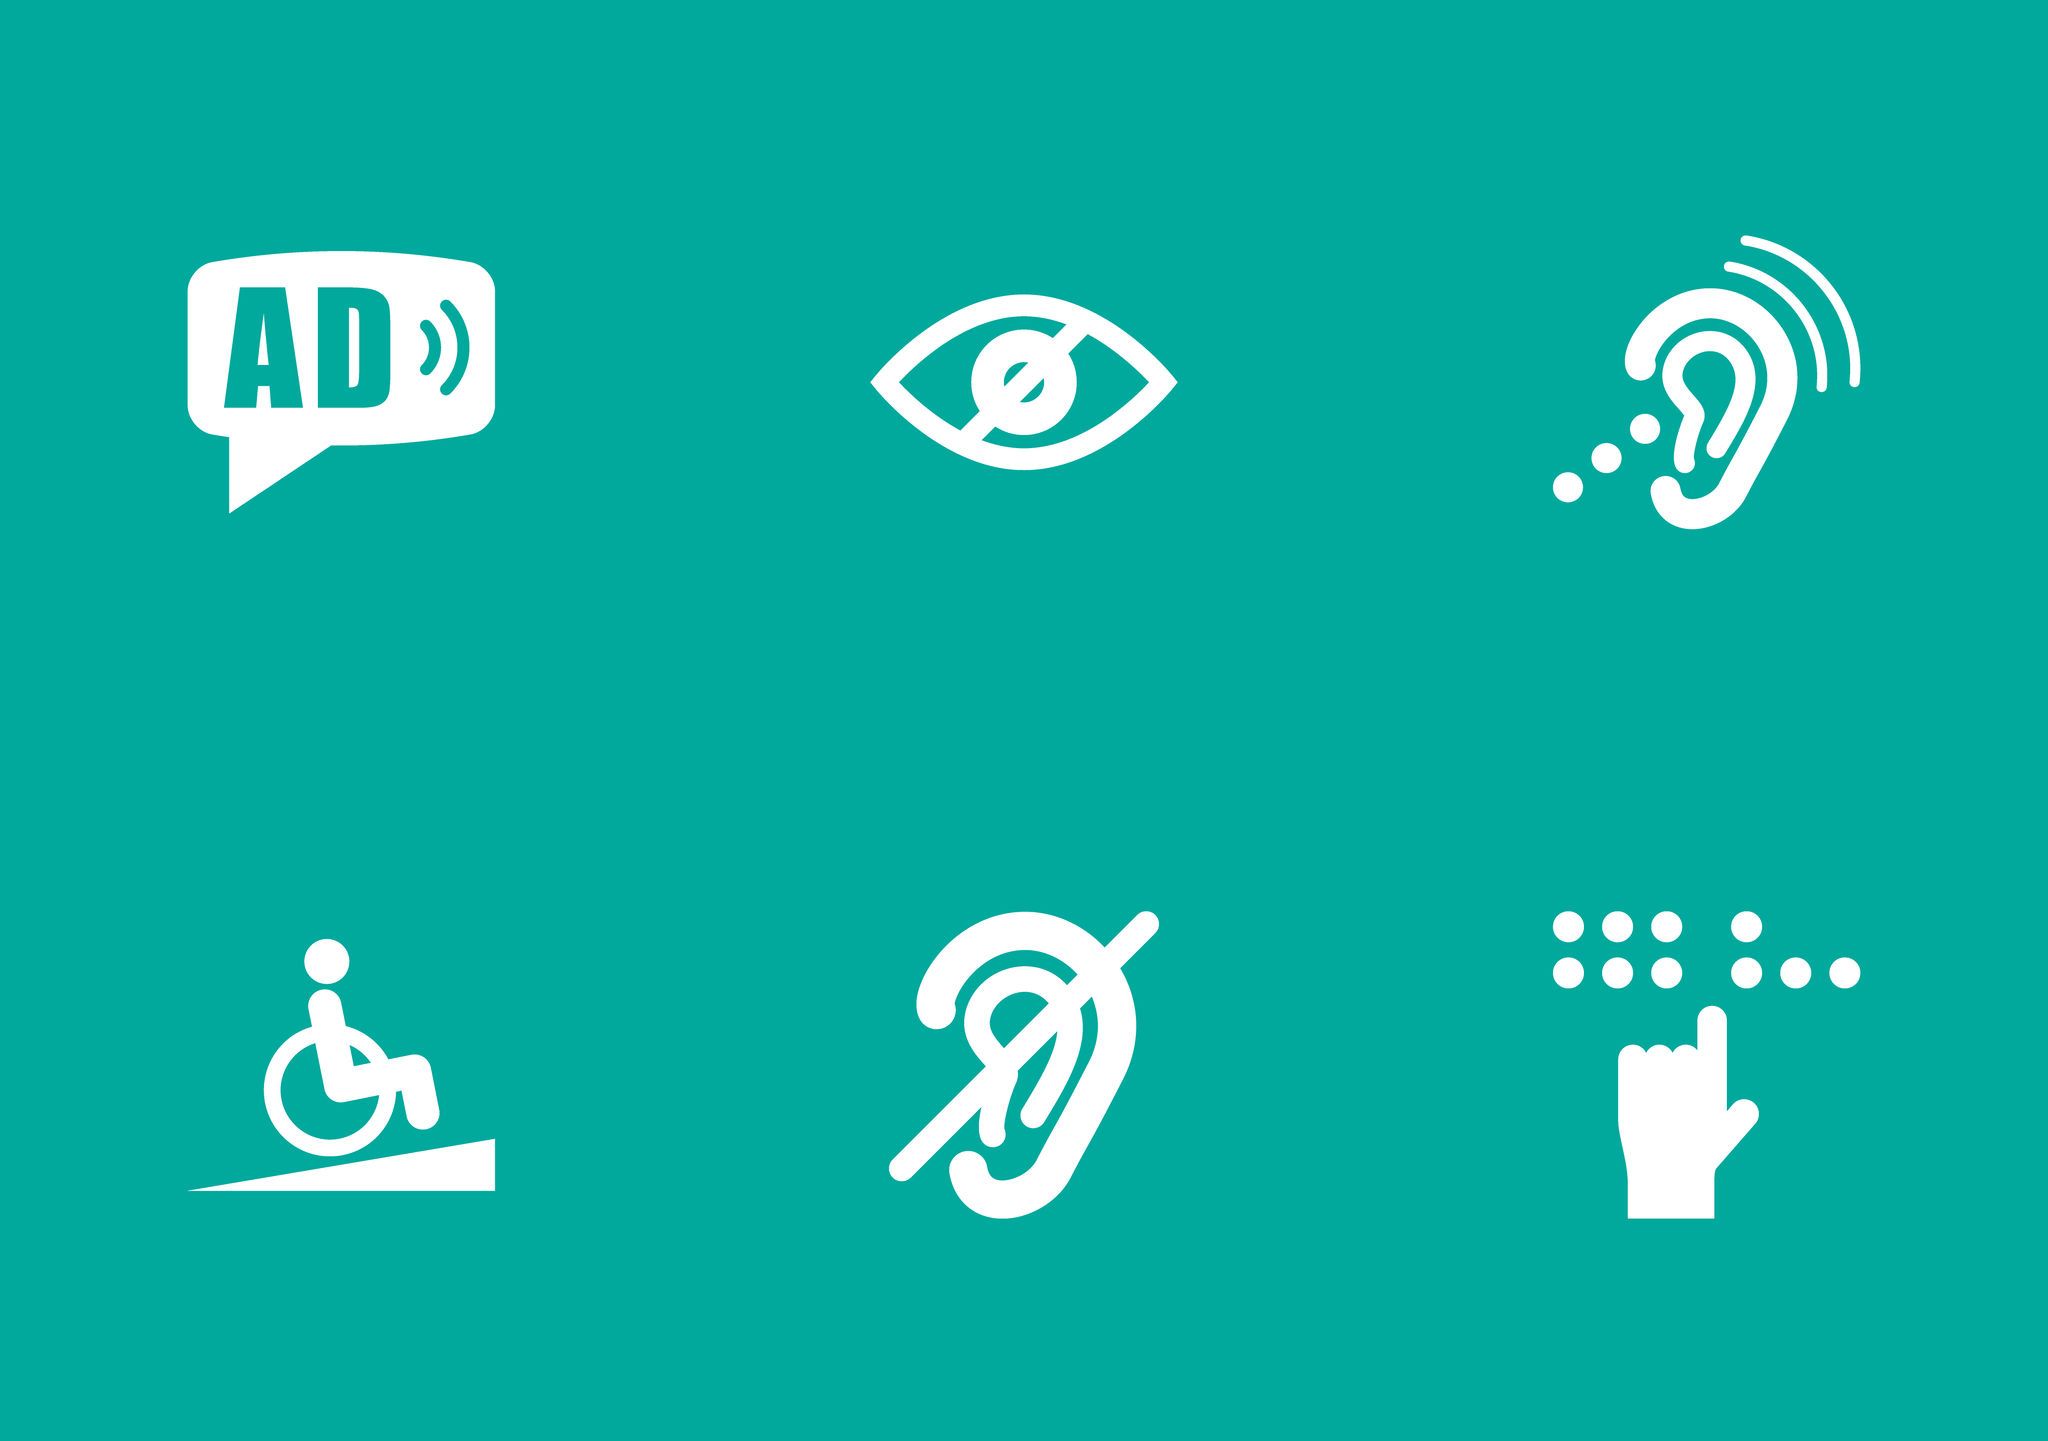 Icons related to accessibility features and assistive devices, including ramps, hearing aids and Braille texts